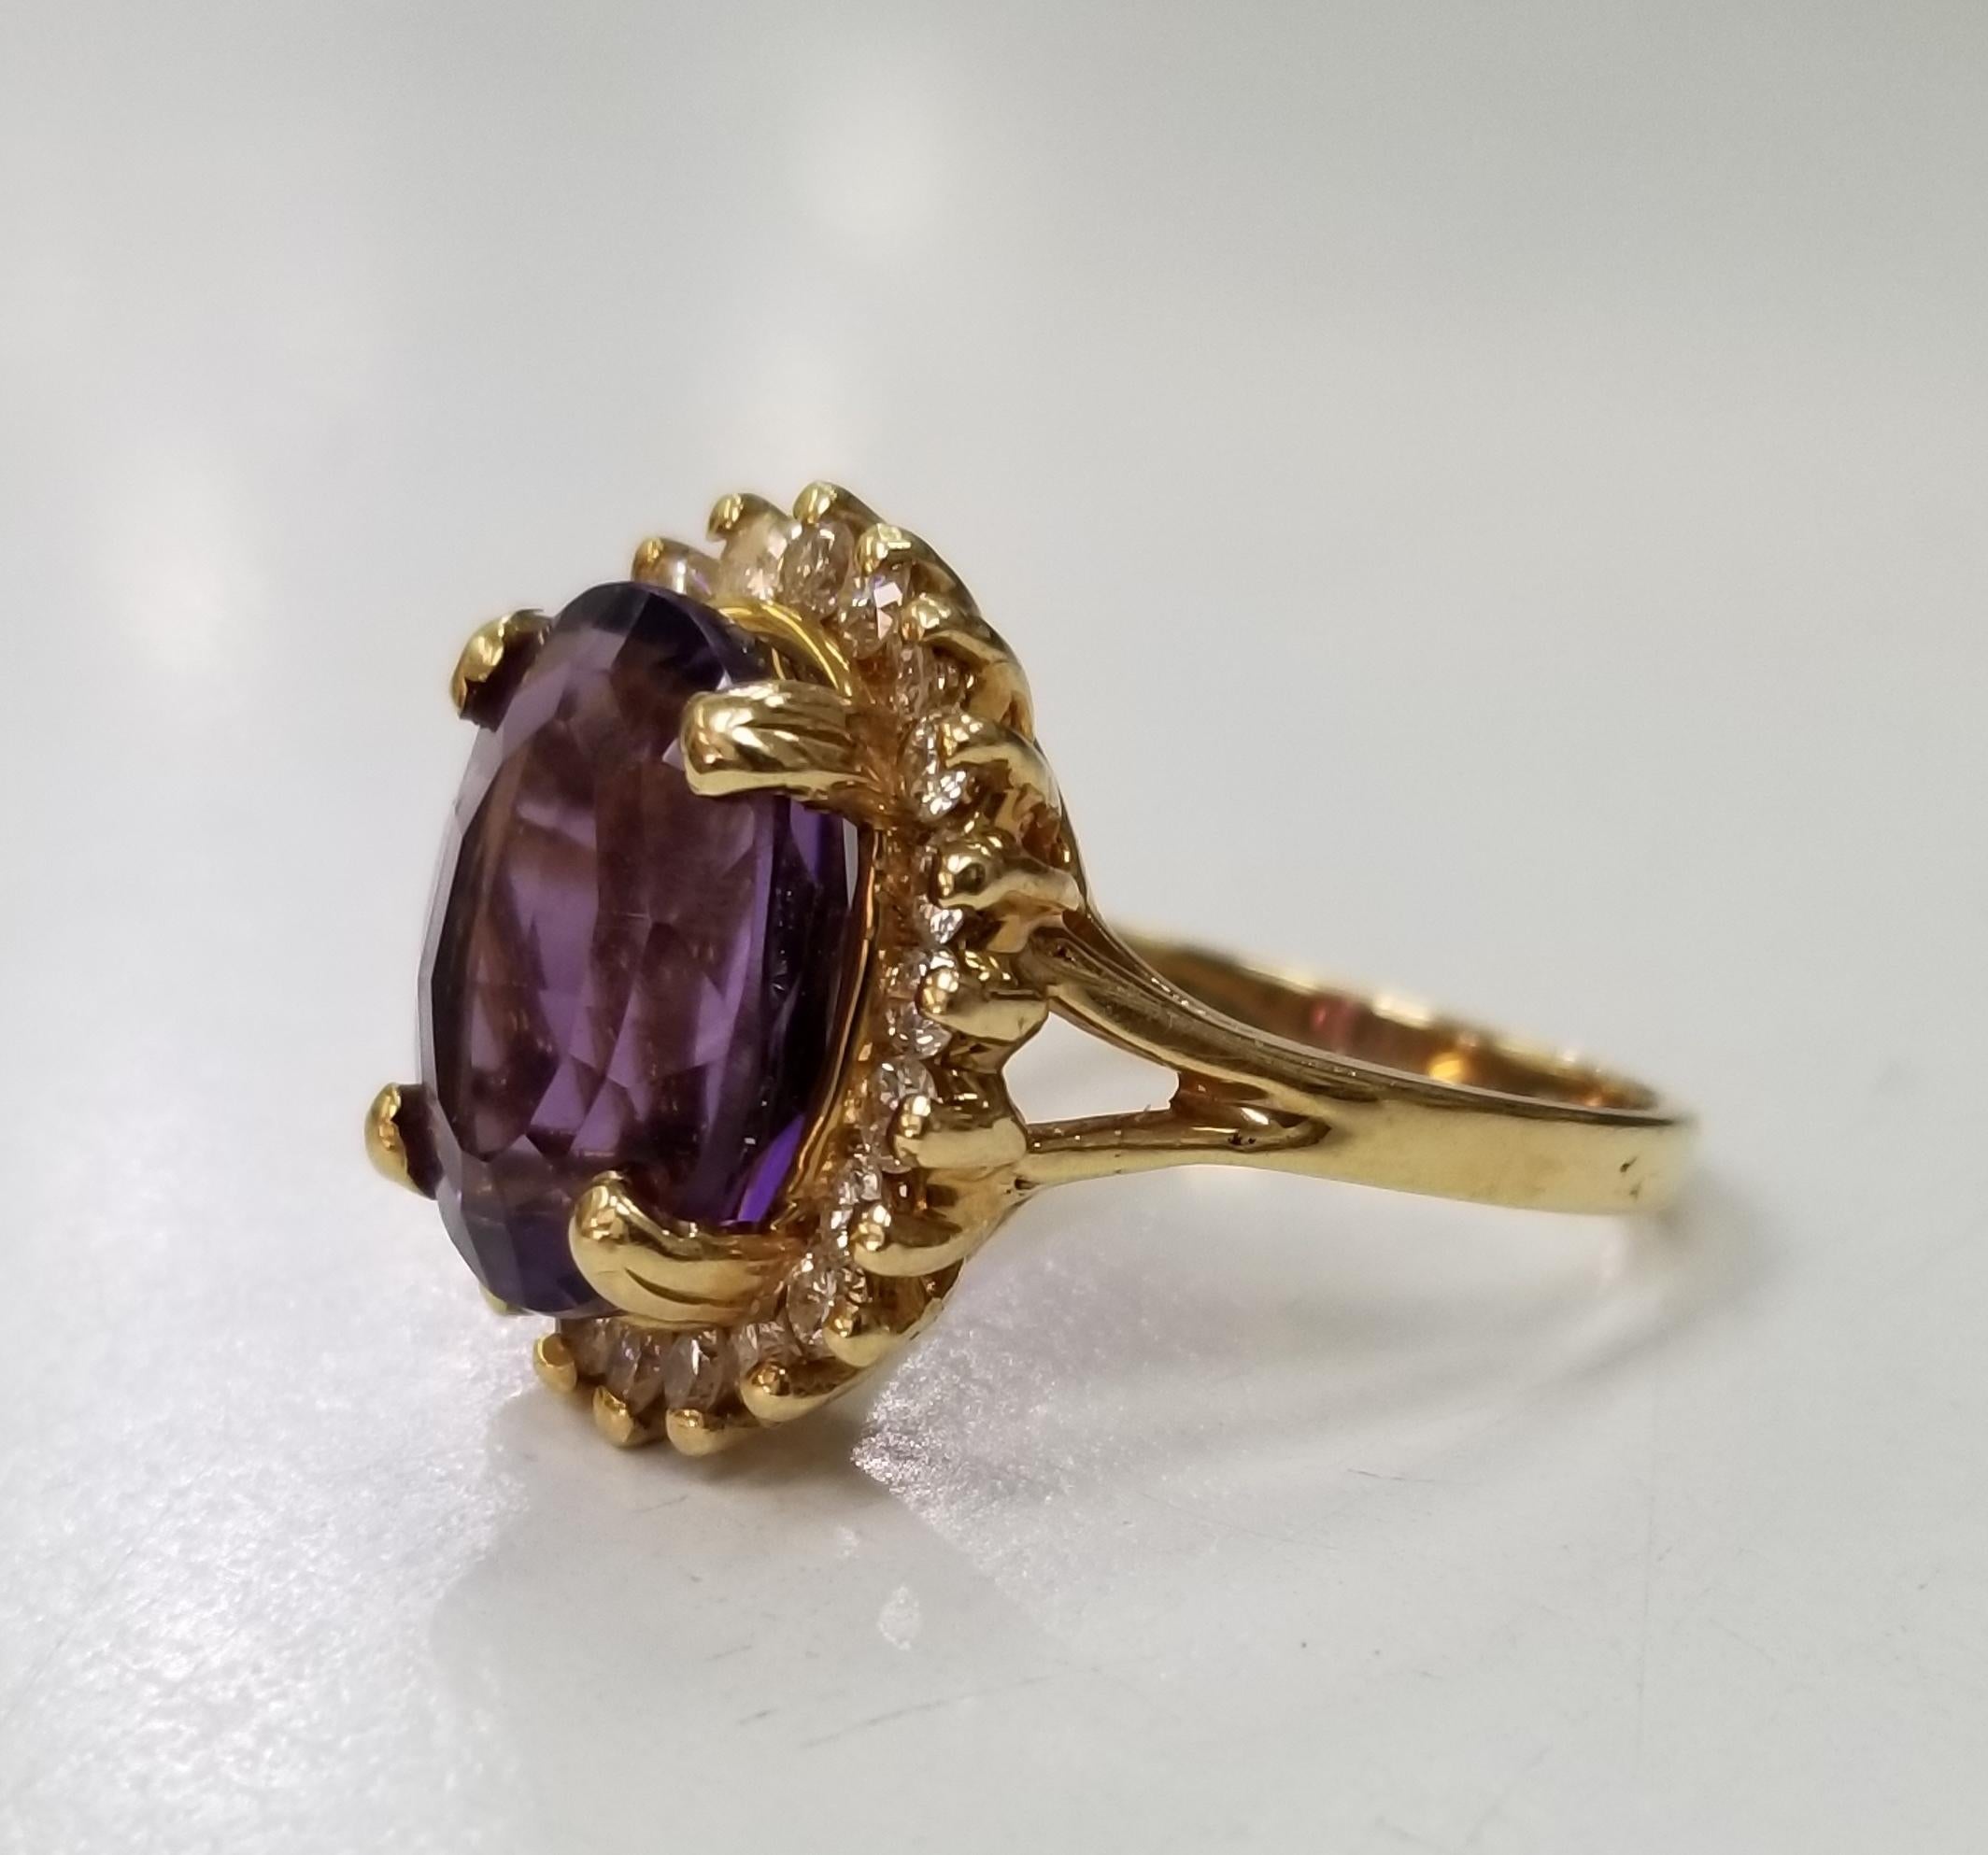 14k yellow gold amethyst and diamond ring, containing 1 oval cut amethyst of gem quality weighing 12.00cts. and 22 round full cut diamonds of very fine quality weighing .56pts. This ring is a size 6 but we will size to fit for free.